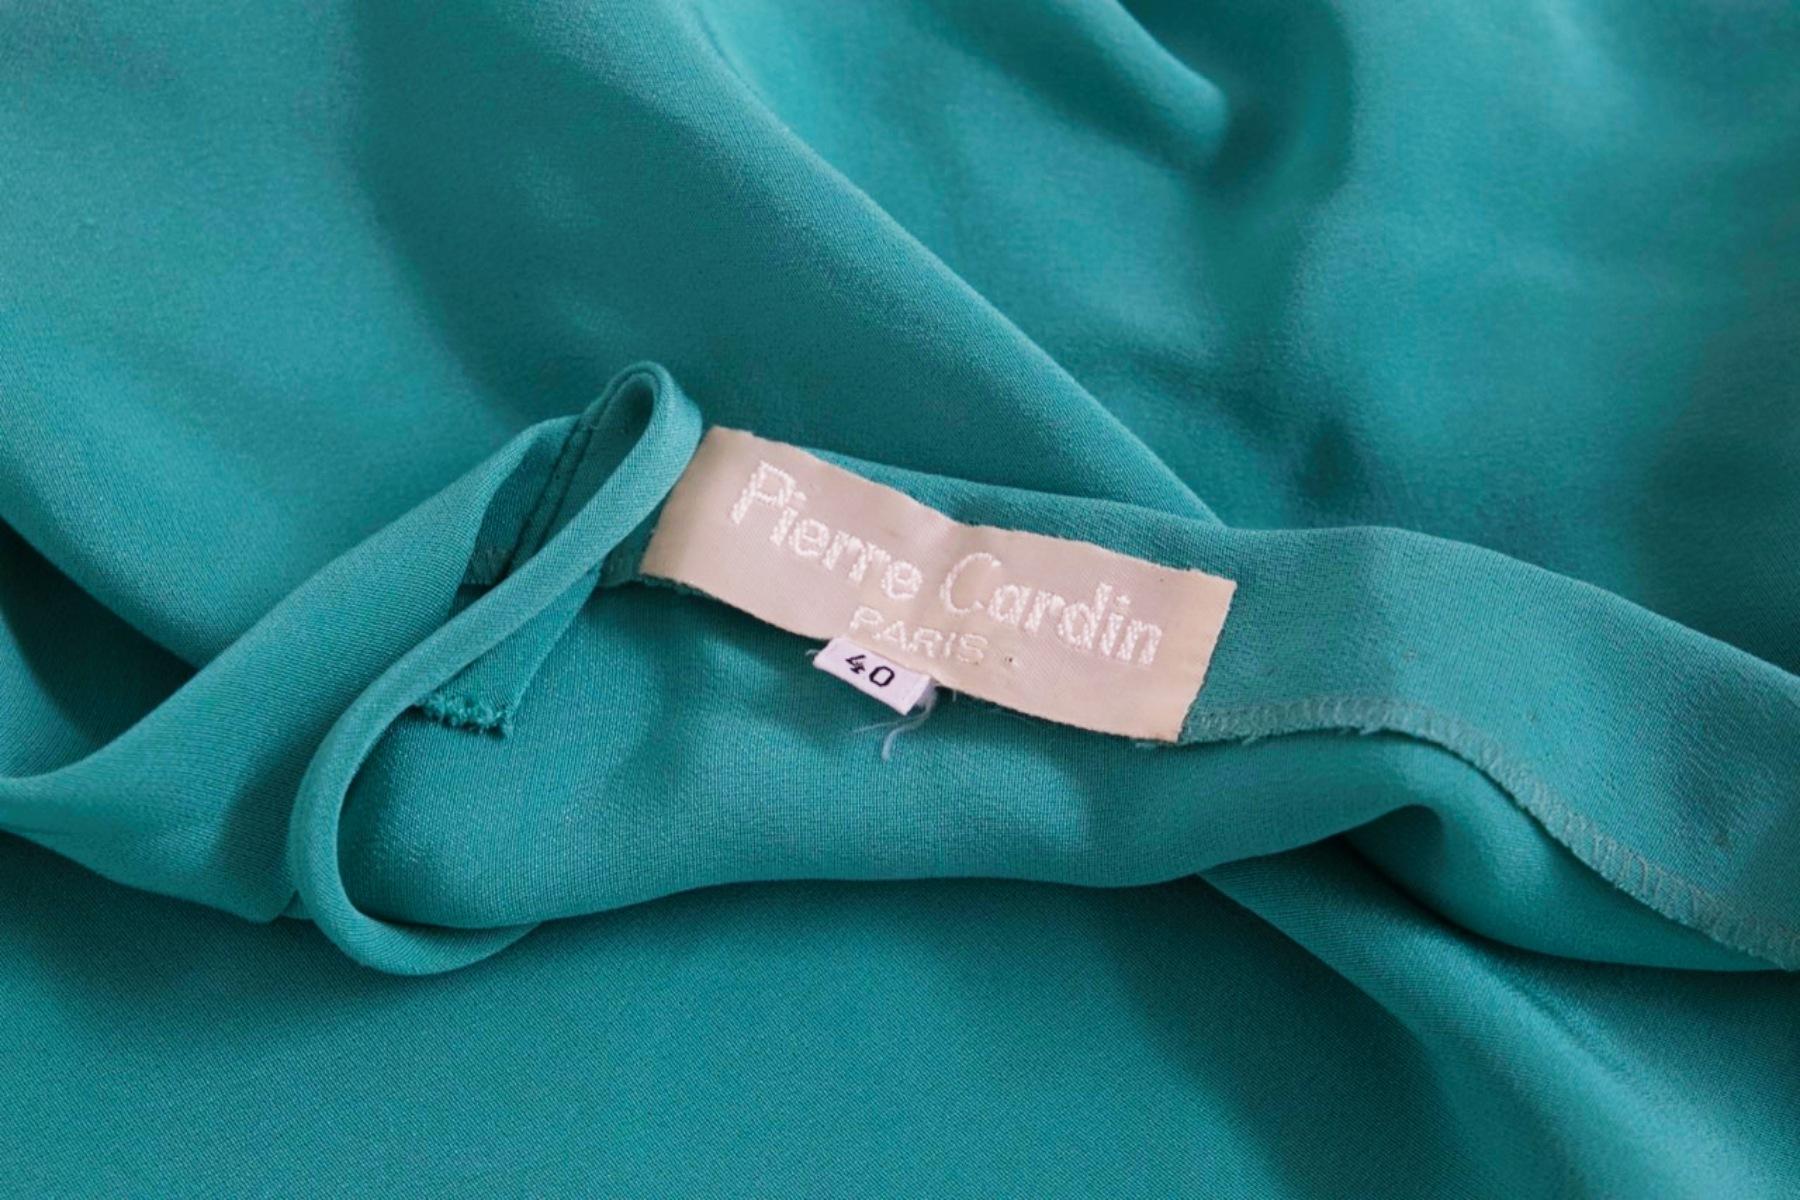 Simple and elegant vintage dress designed by Pierre Cardin, made in France.
ORIGINAL LABEL.
The dress is very simple, made of a very light teal fabric.
The dress is long to the ankles and goes down very soft to the feet.Its particularity lies on the